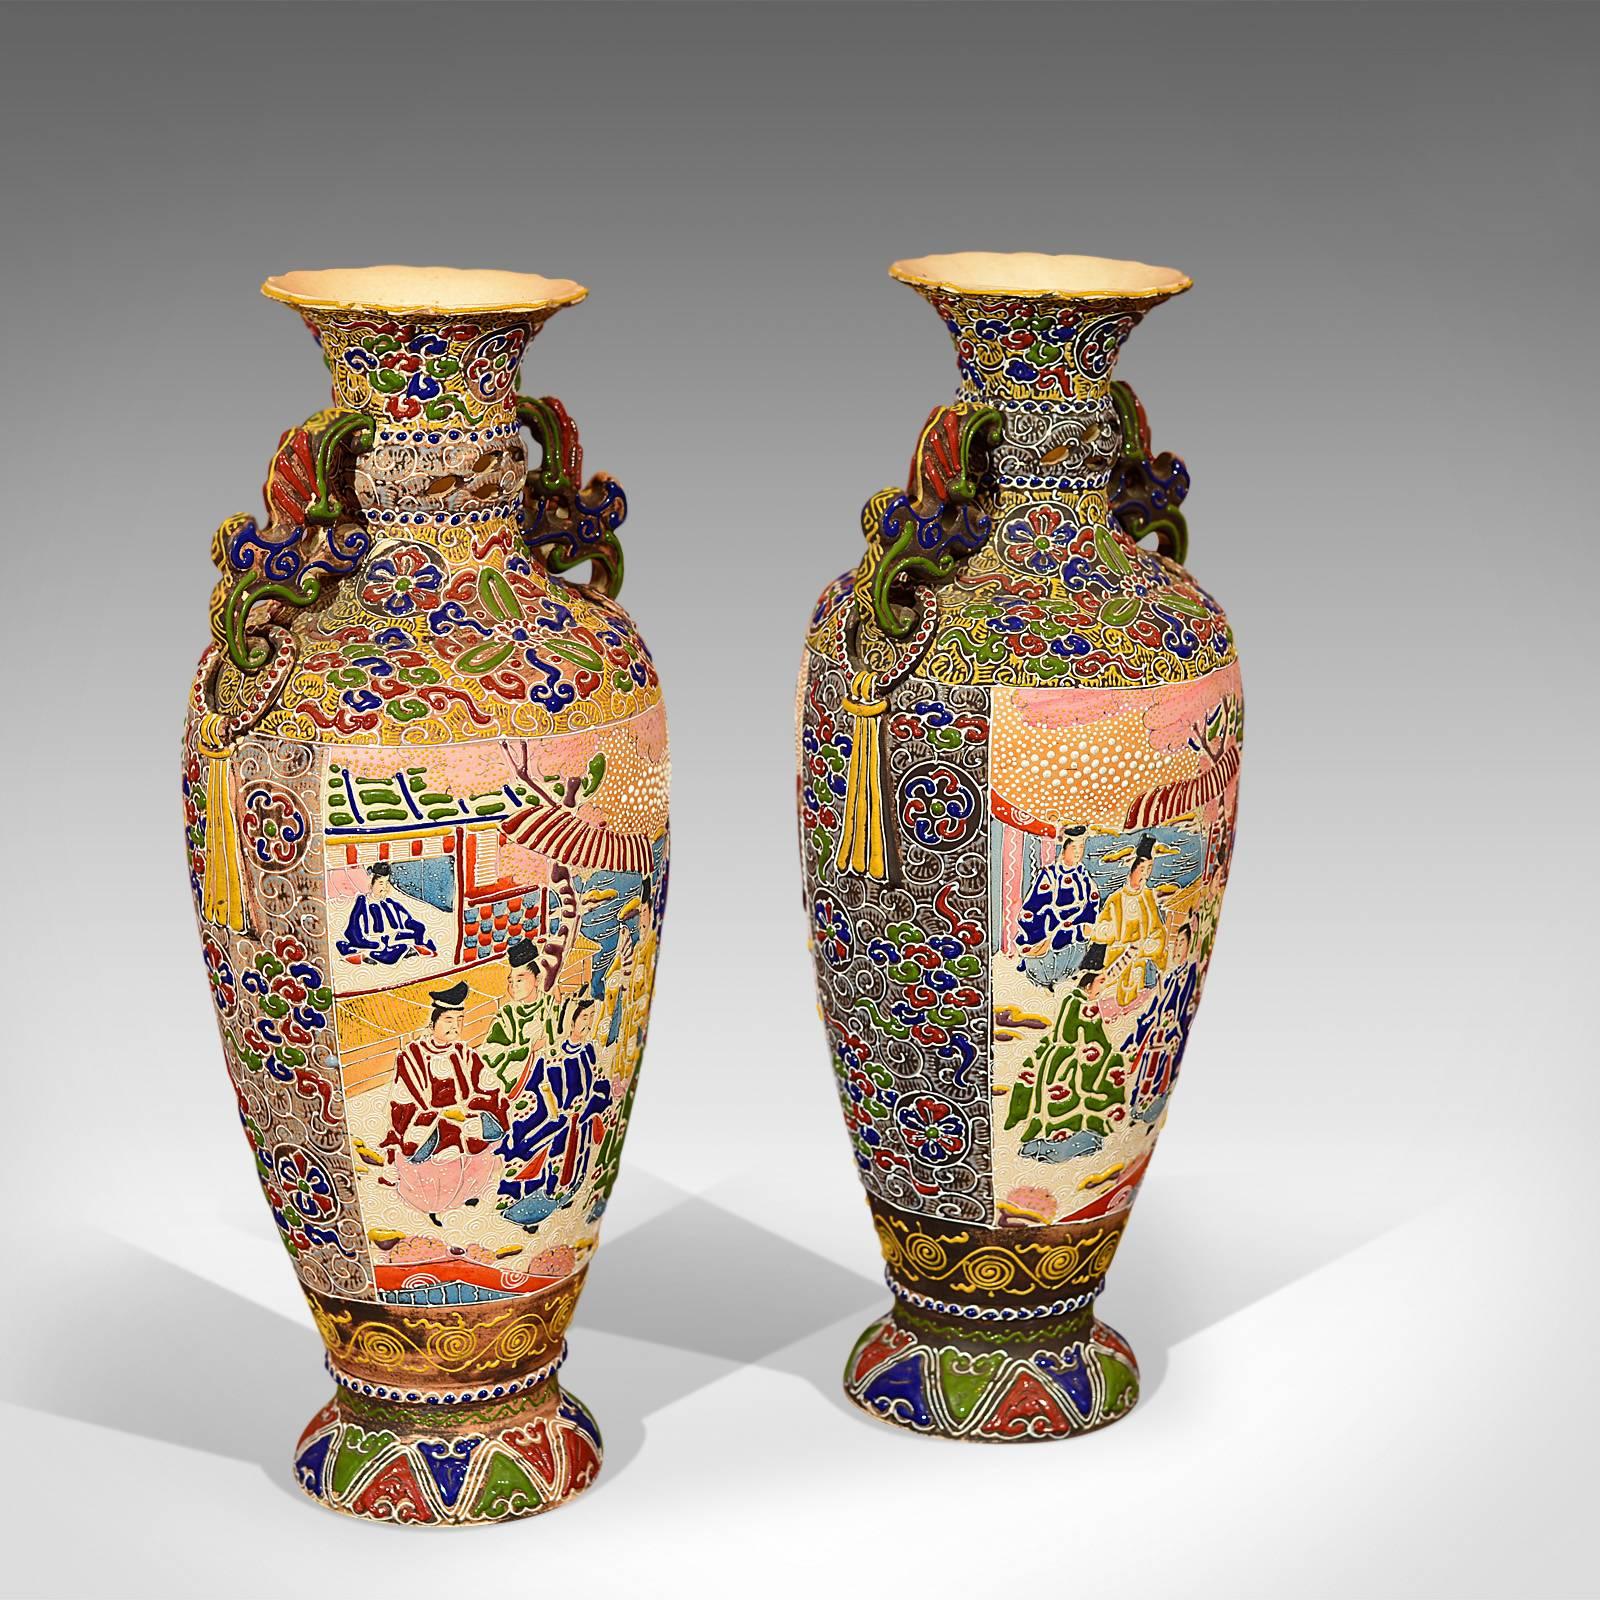 This is a pair of Japanese Moriage antique vases.

Colorful in raised enamel, glazed slipware or 'moriage', this profusely decorated pair of urns depict charming oriental scenes framed with foliage and floral detail interspersed with stylised bead